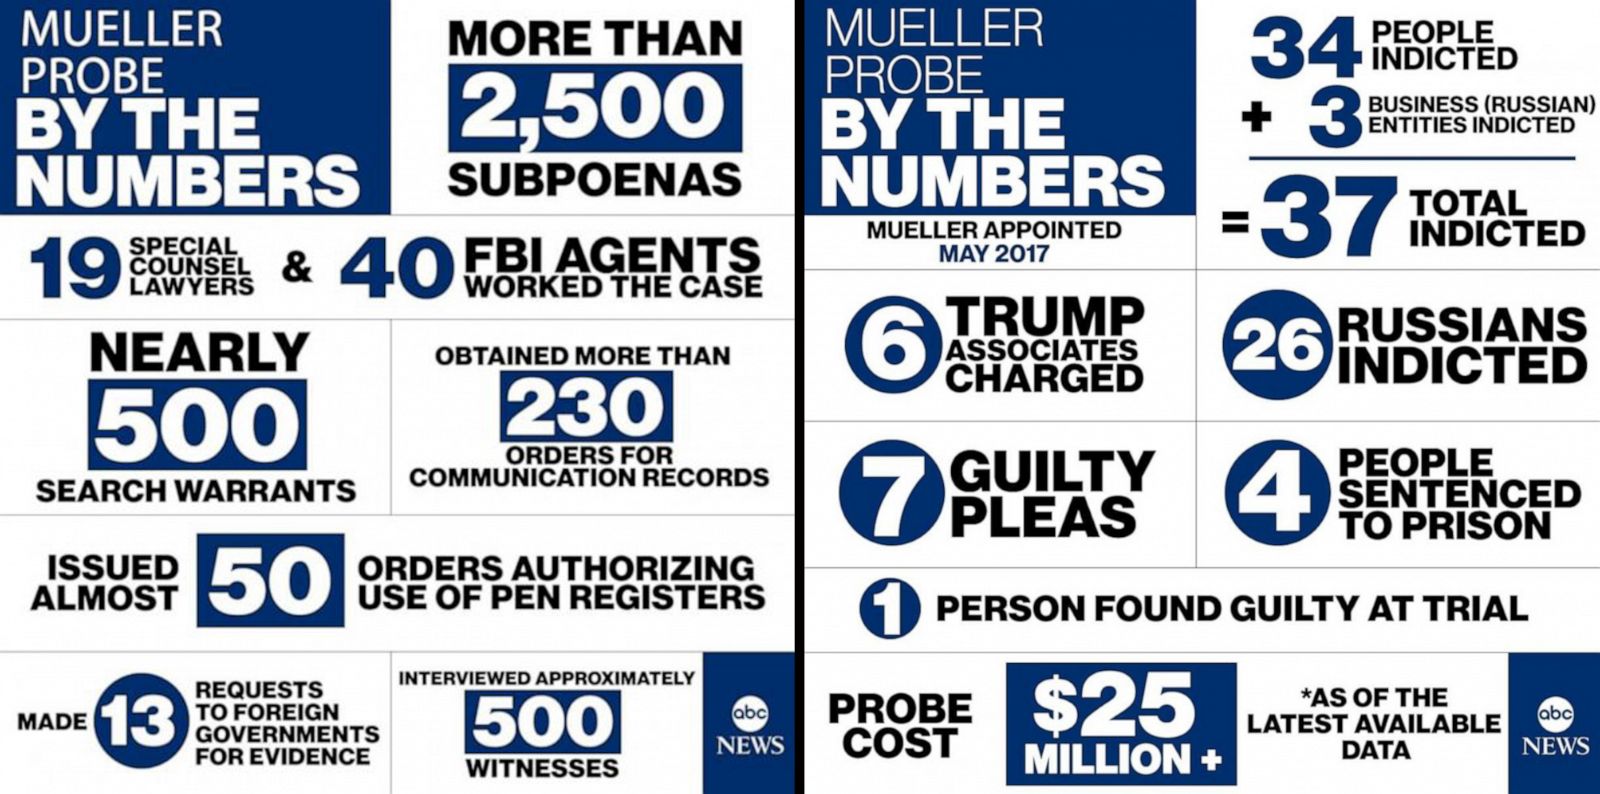 mueller-probe-graphic-ours-trumps-01-abc-jef-190522_hpEmbed_2x1_1600.jpg